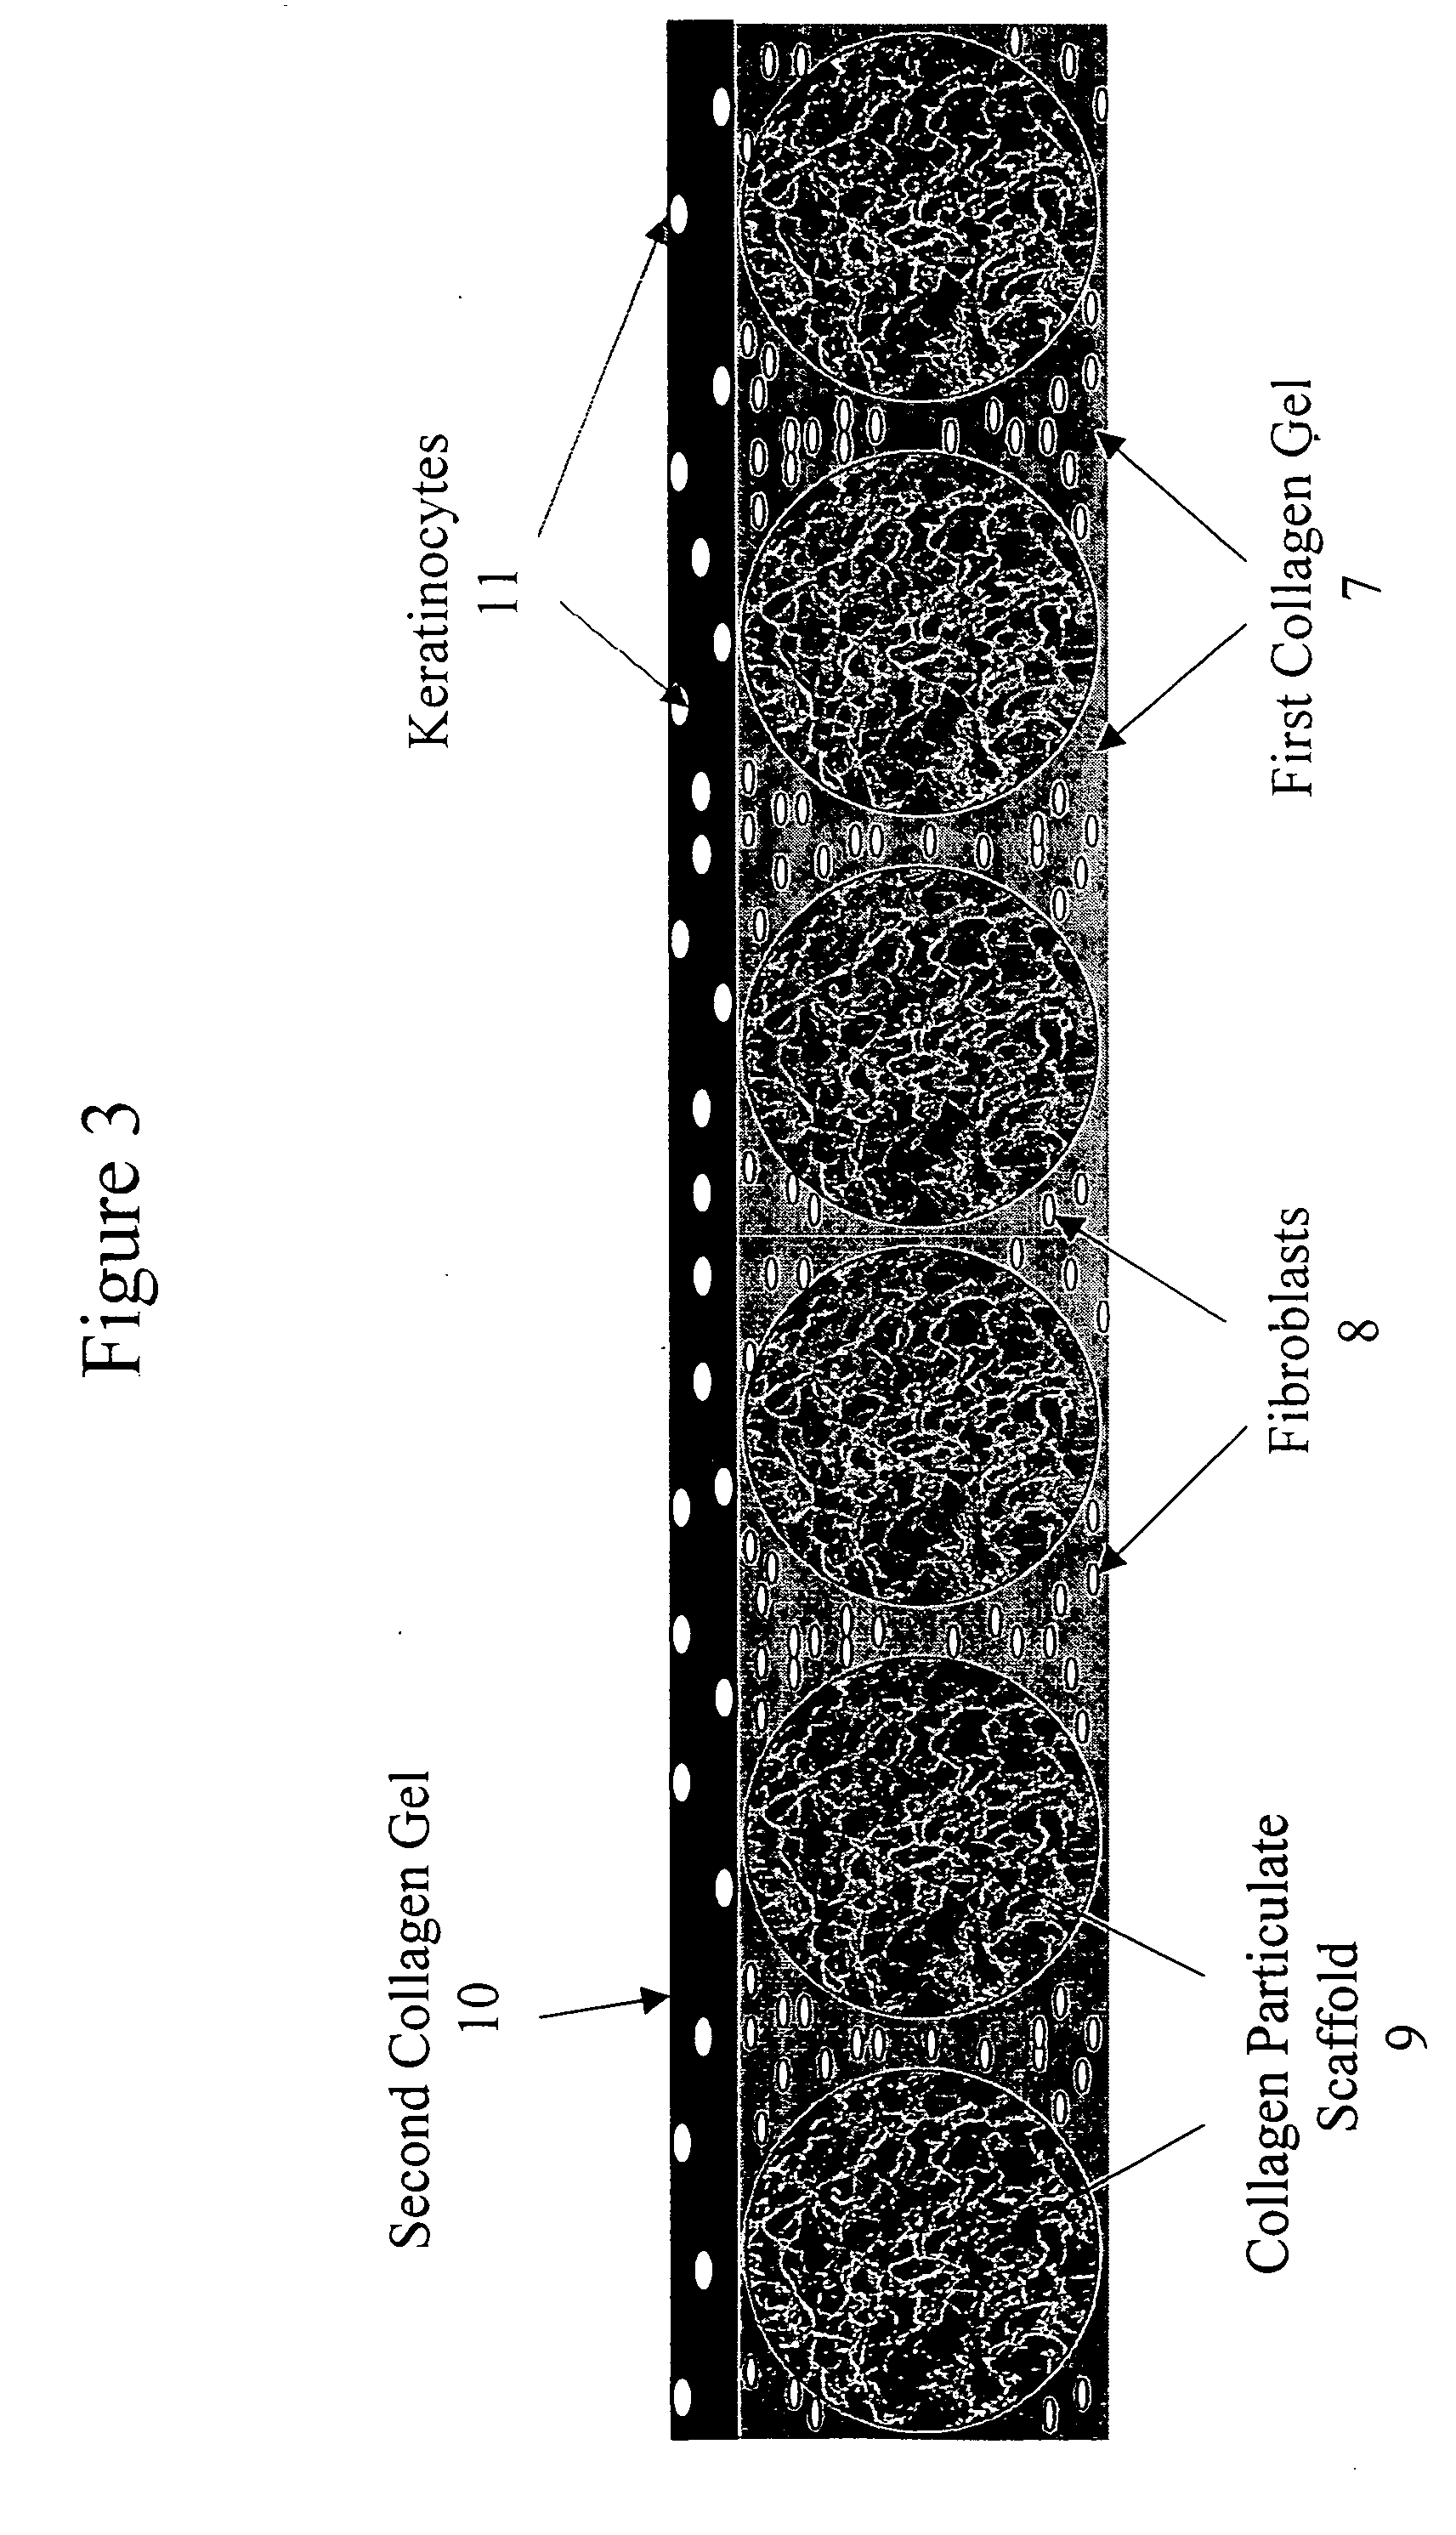 Tissue composites and uses thereof